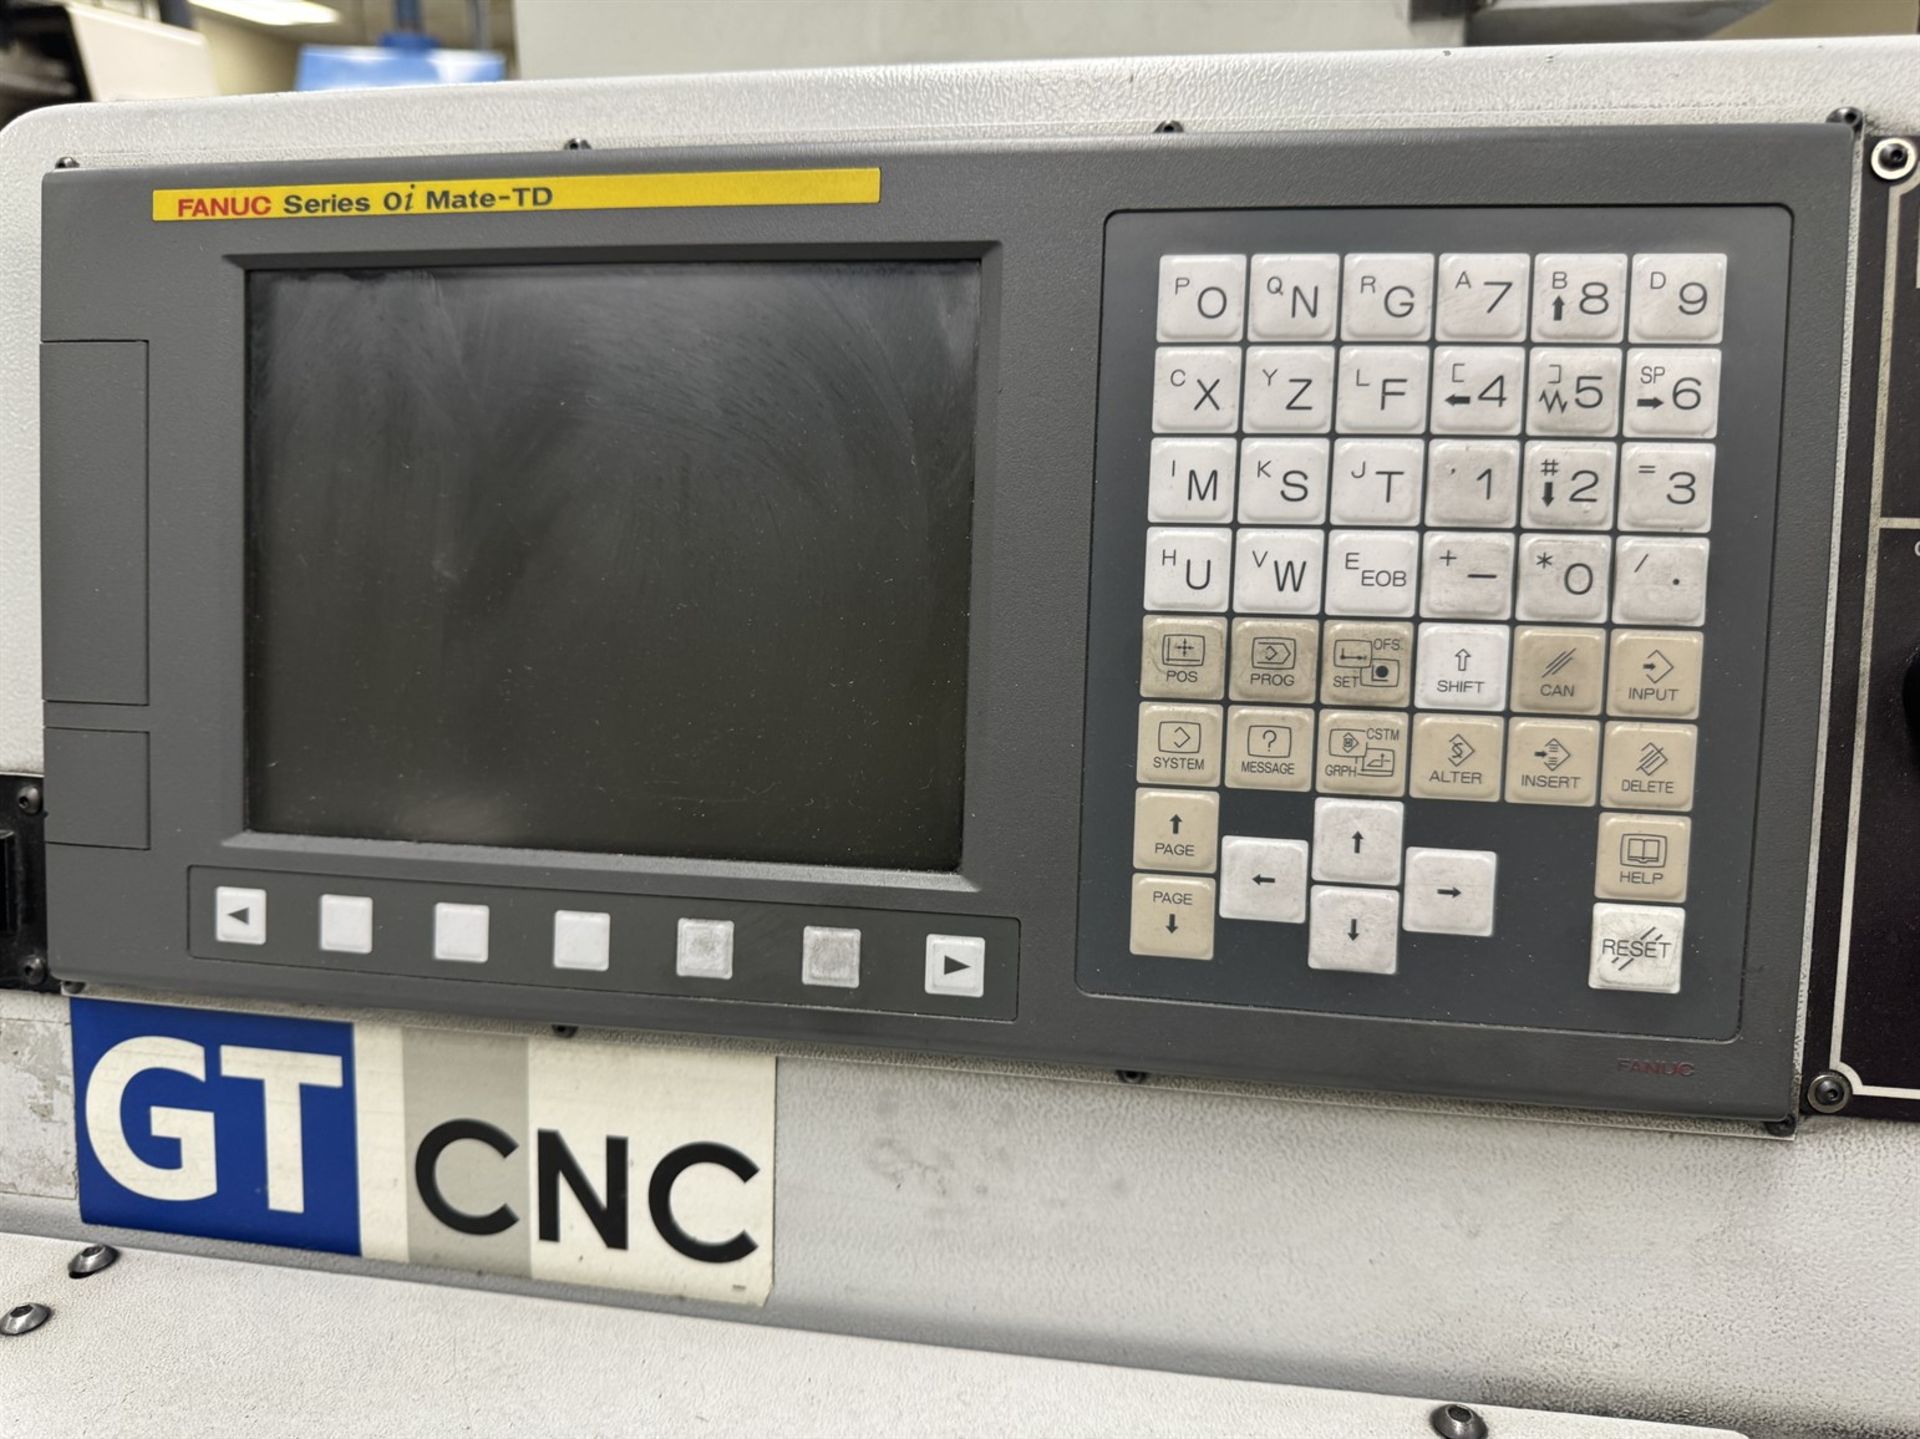 CUBIC GT Z2 CNC Gang Tool Lathe, s/n na, Fanuc Series Oi Mate-TD Control, 60mm Turning Dia, 120mm Sw - Image 6 of 7